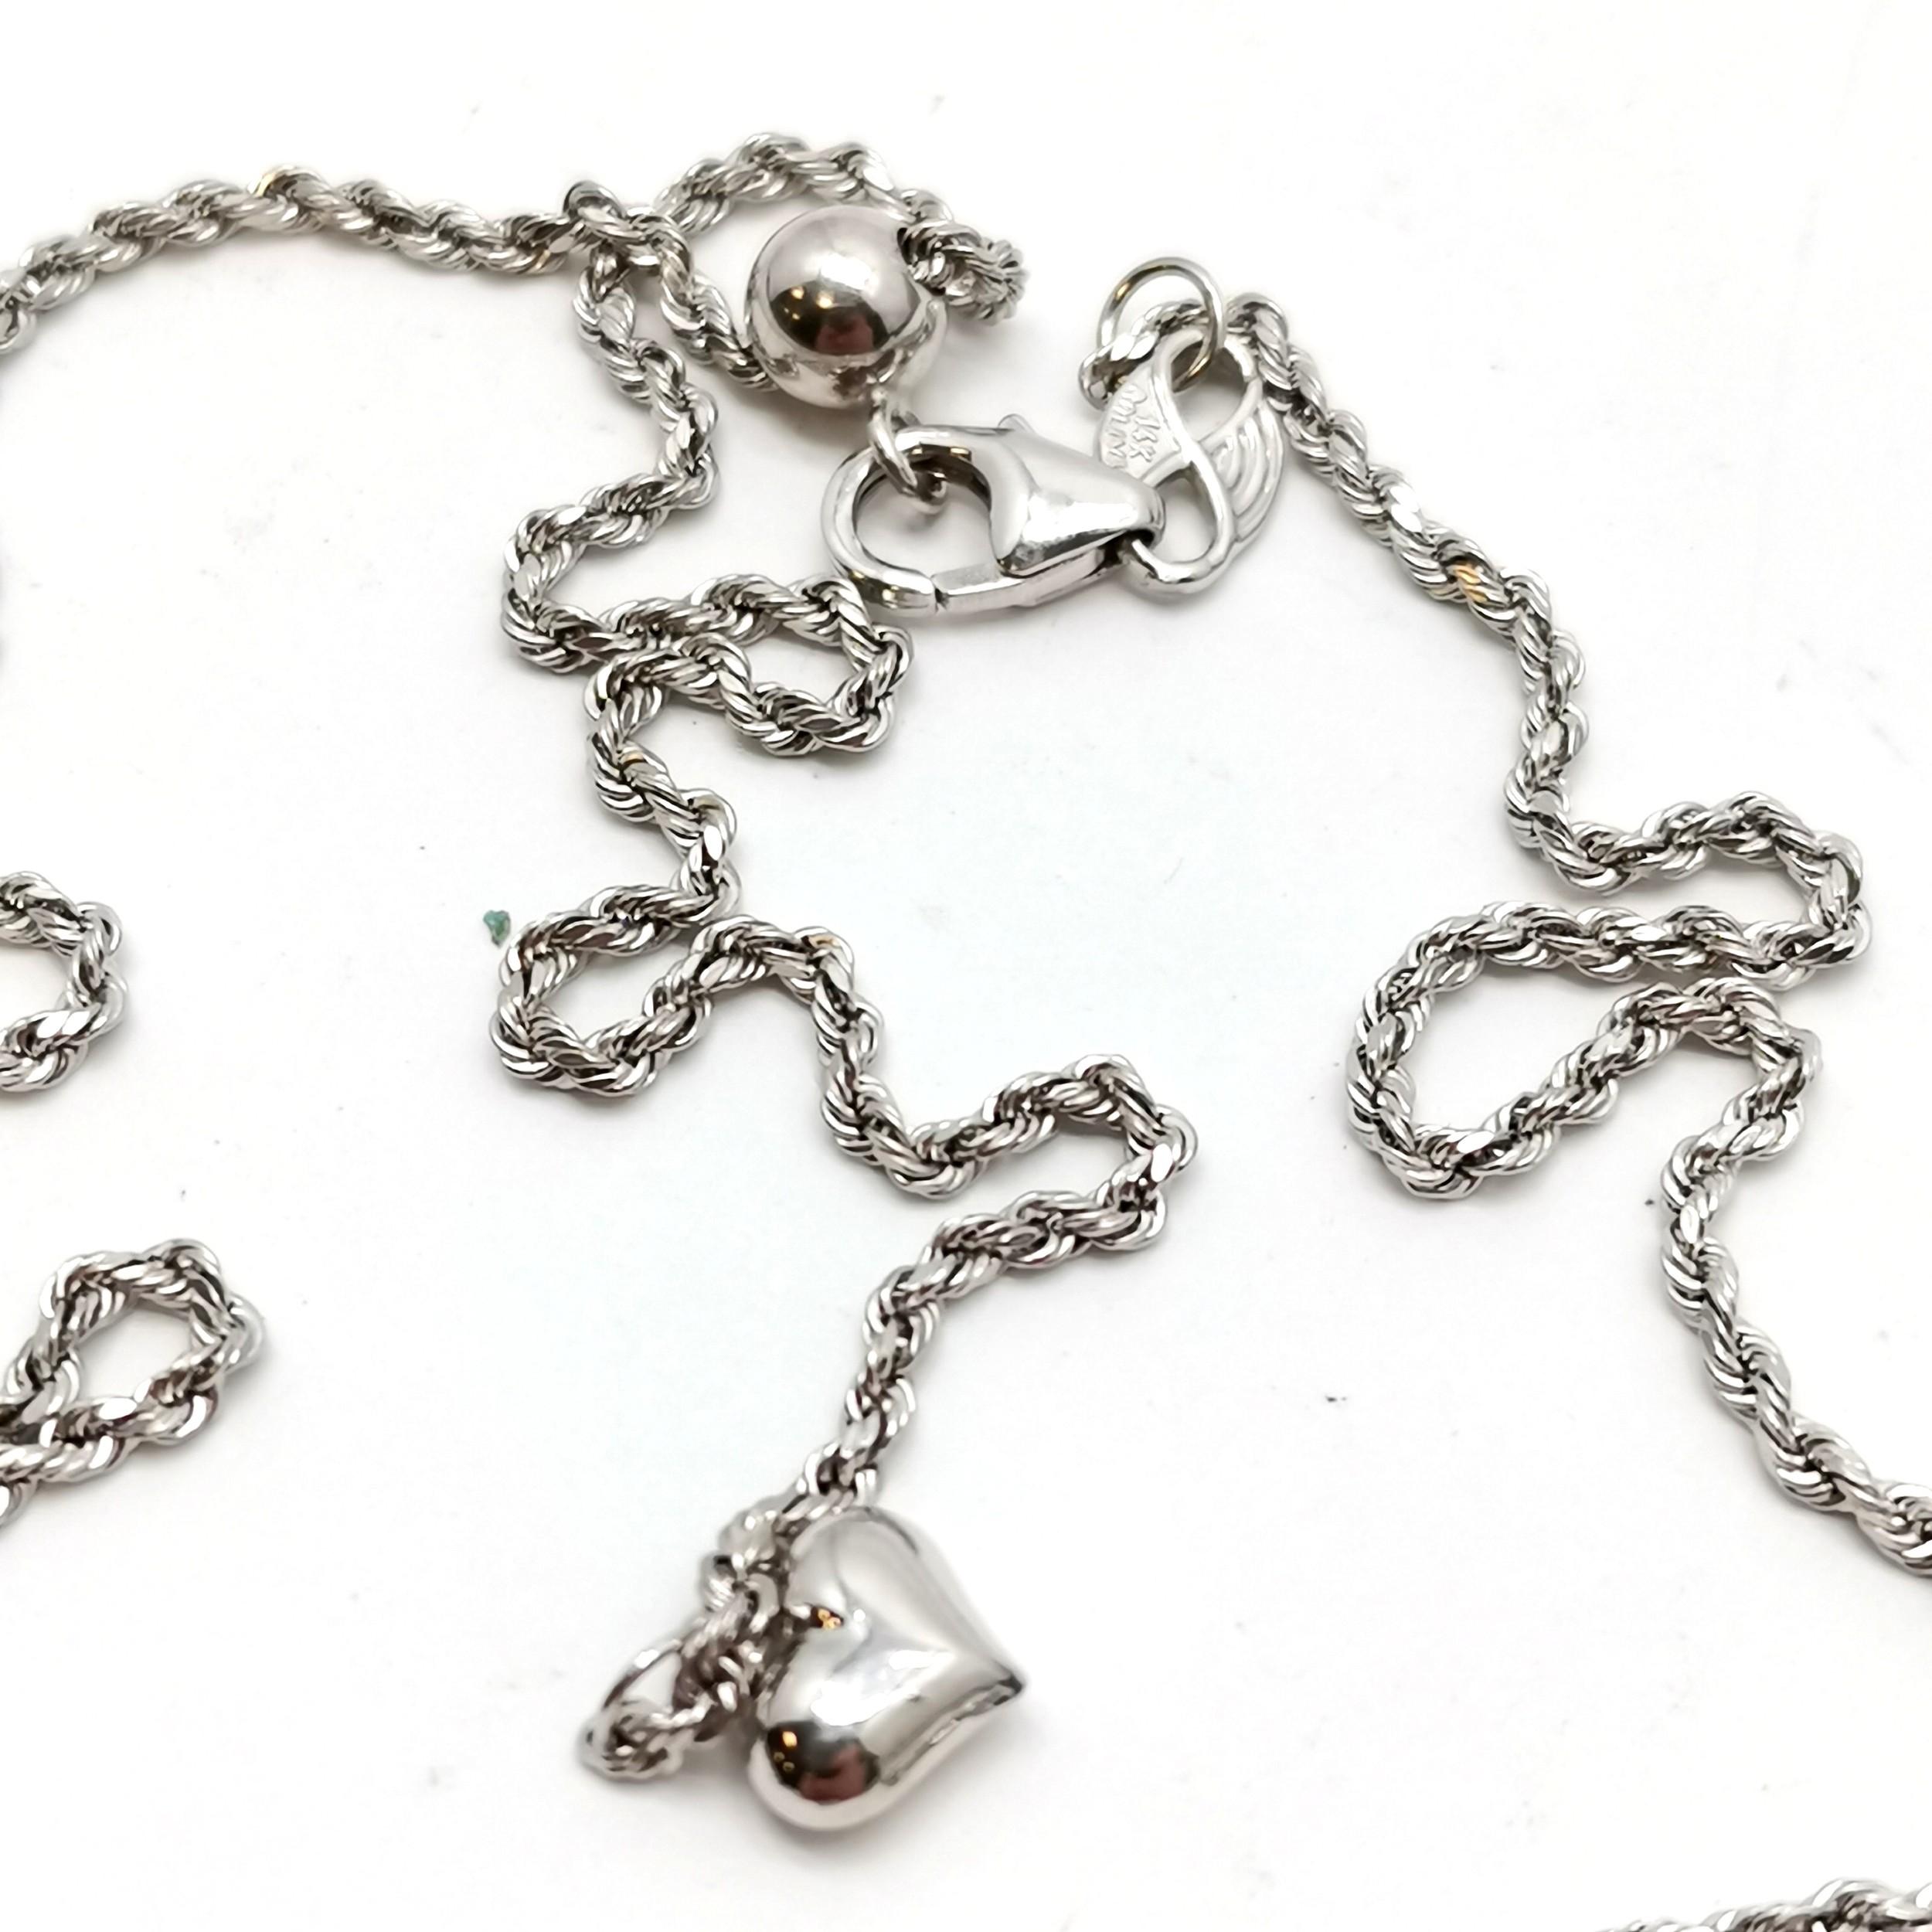 Bolivia 14ct white gold chain with heart pendant detail - 48cm + 11cm drop & 3.2g - Image 3 of 4